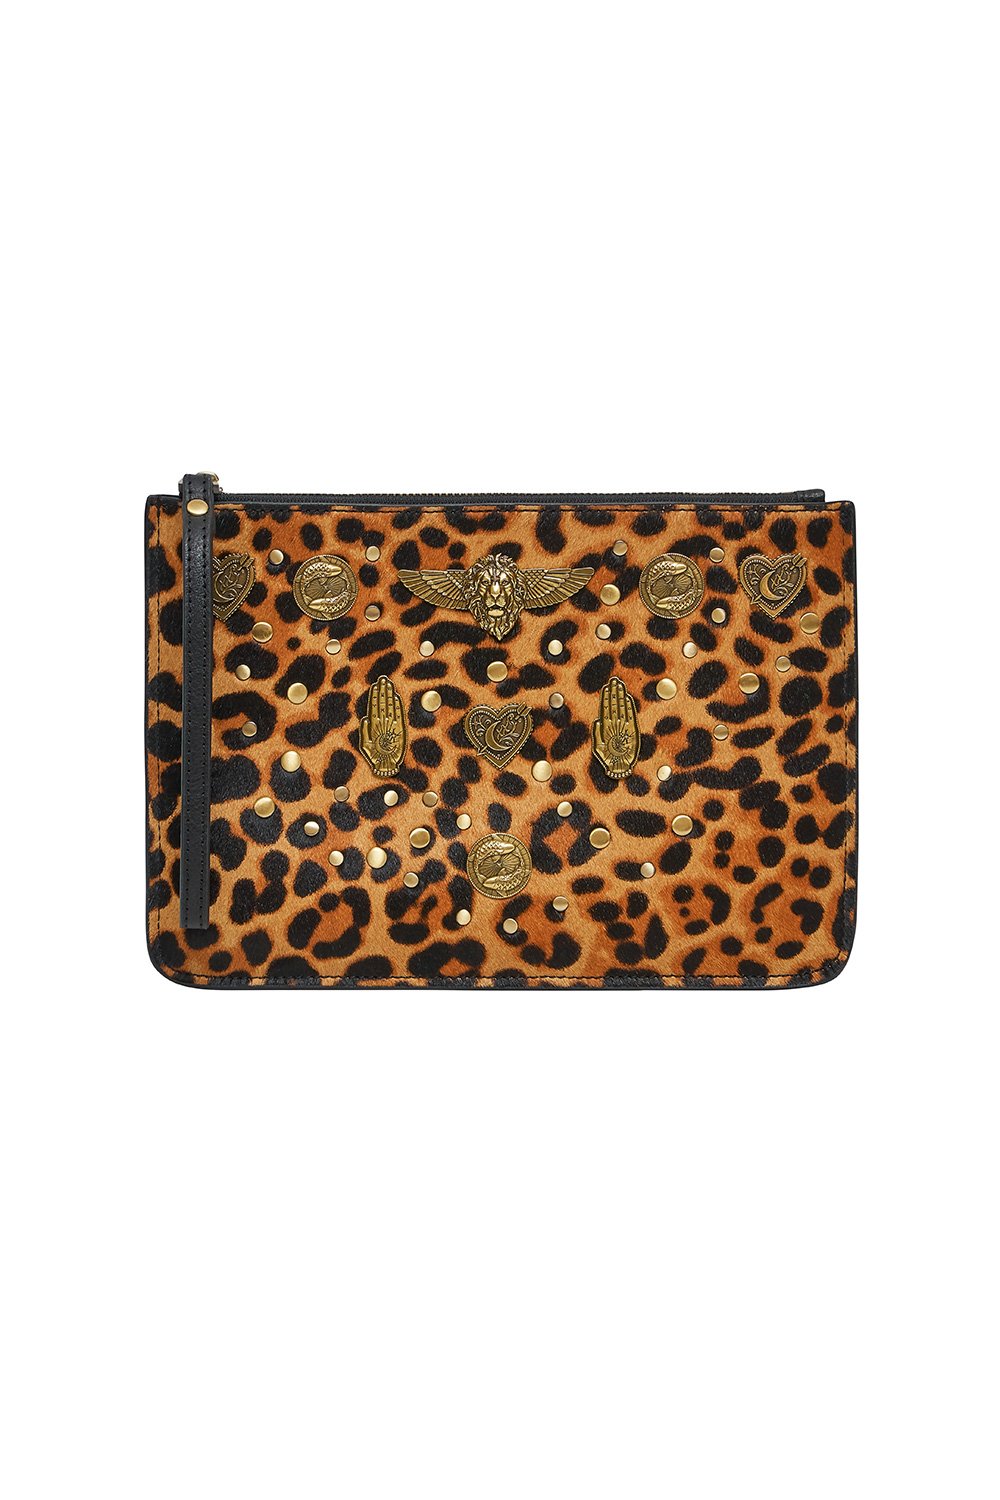 STUDDED LEATHER CLUTCH FIRE AT NIGHT